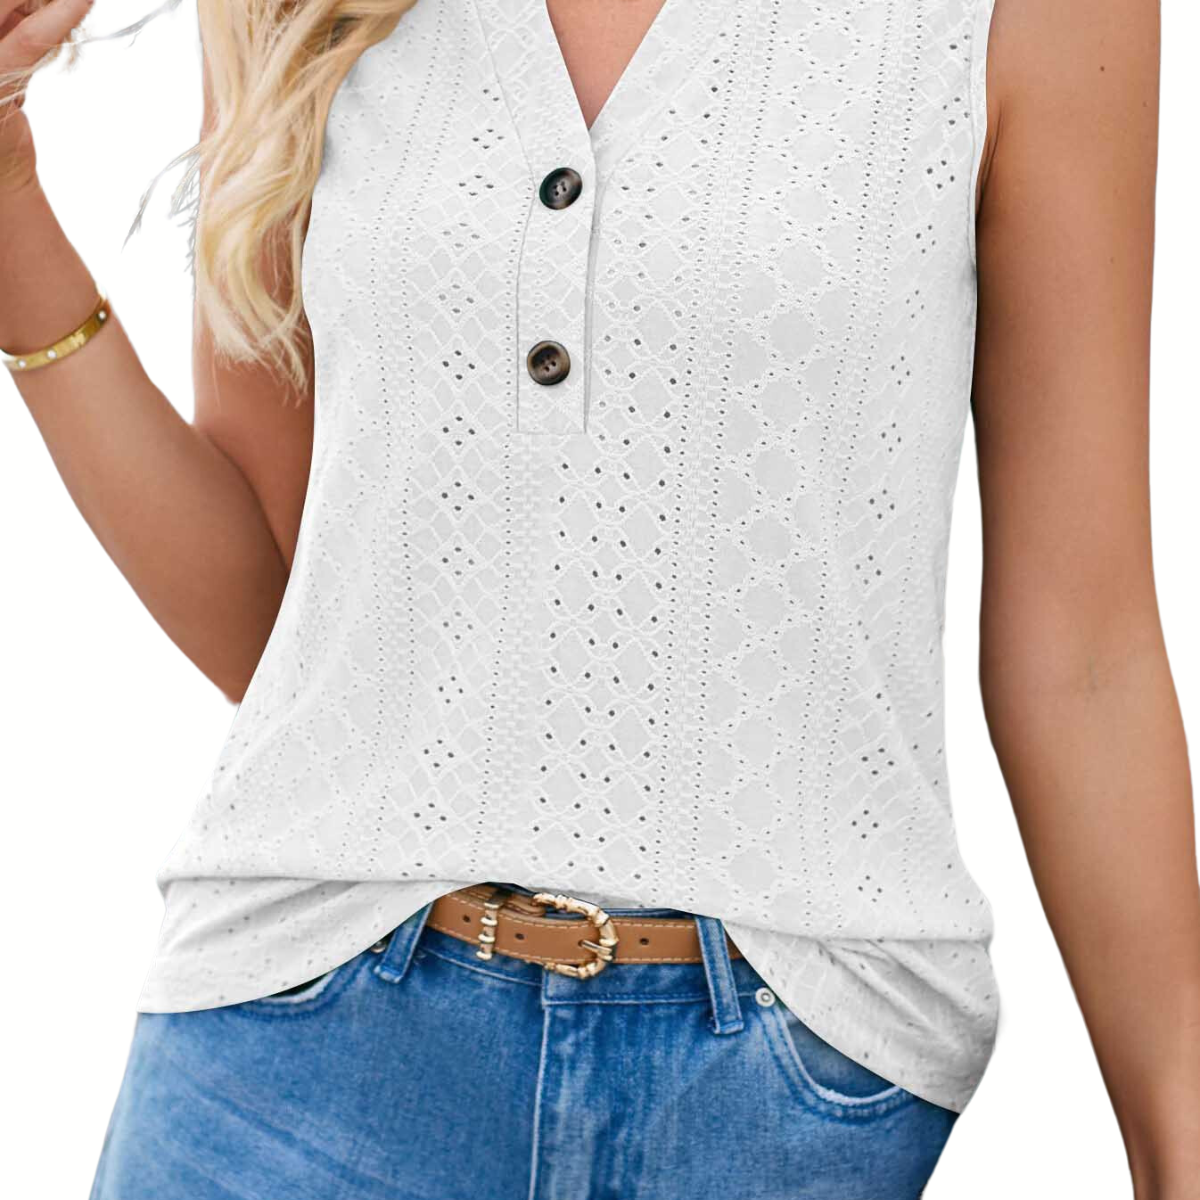 A woman is wearing a FASHION GO Eyelet look Button V-Neck Tank Top - White and blue jeans. She has a brown belt and a bracelet on her left wrist, perfect for summer nights.